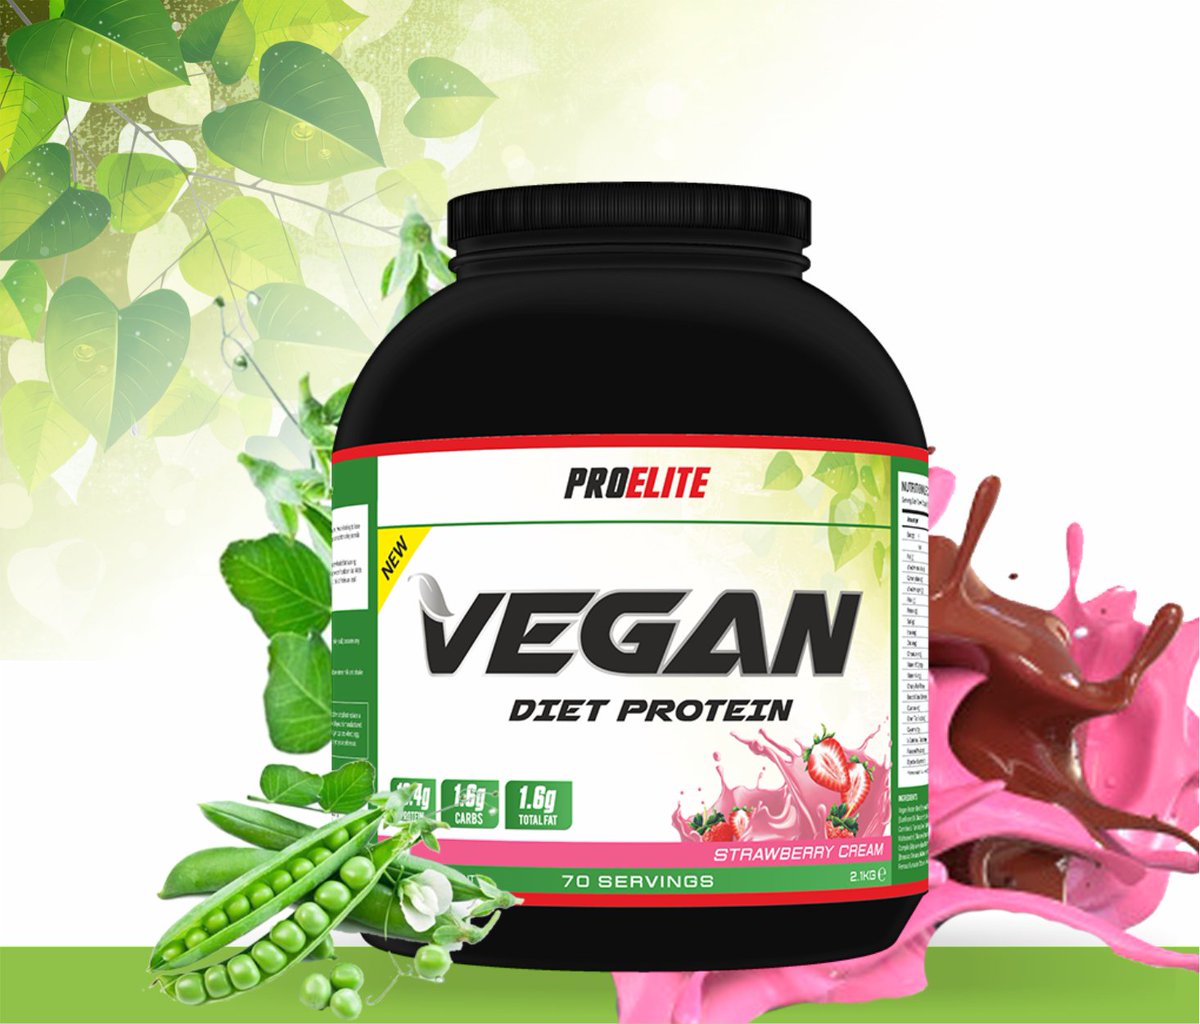 Introducing our Simple, Sweet, & Protein packed Vegan Protein. Now available in 2 flavours; Chocolate & Strawberry. 
#plantbased #plantbaseddiet #plantprotein #vegan #vegandiet #veganprotein #plantbuilt #plantbasednutrition #veganbodybuilding #veganbodybuilder #proelite